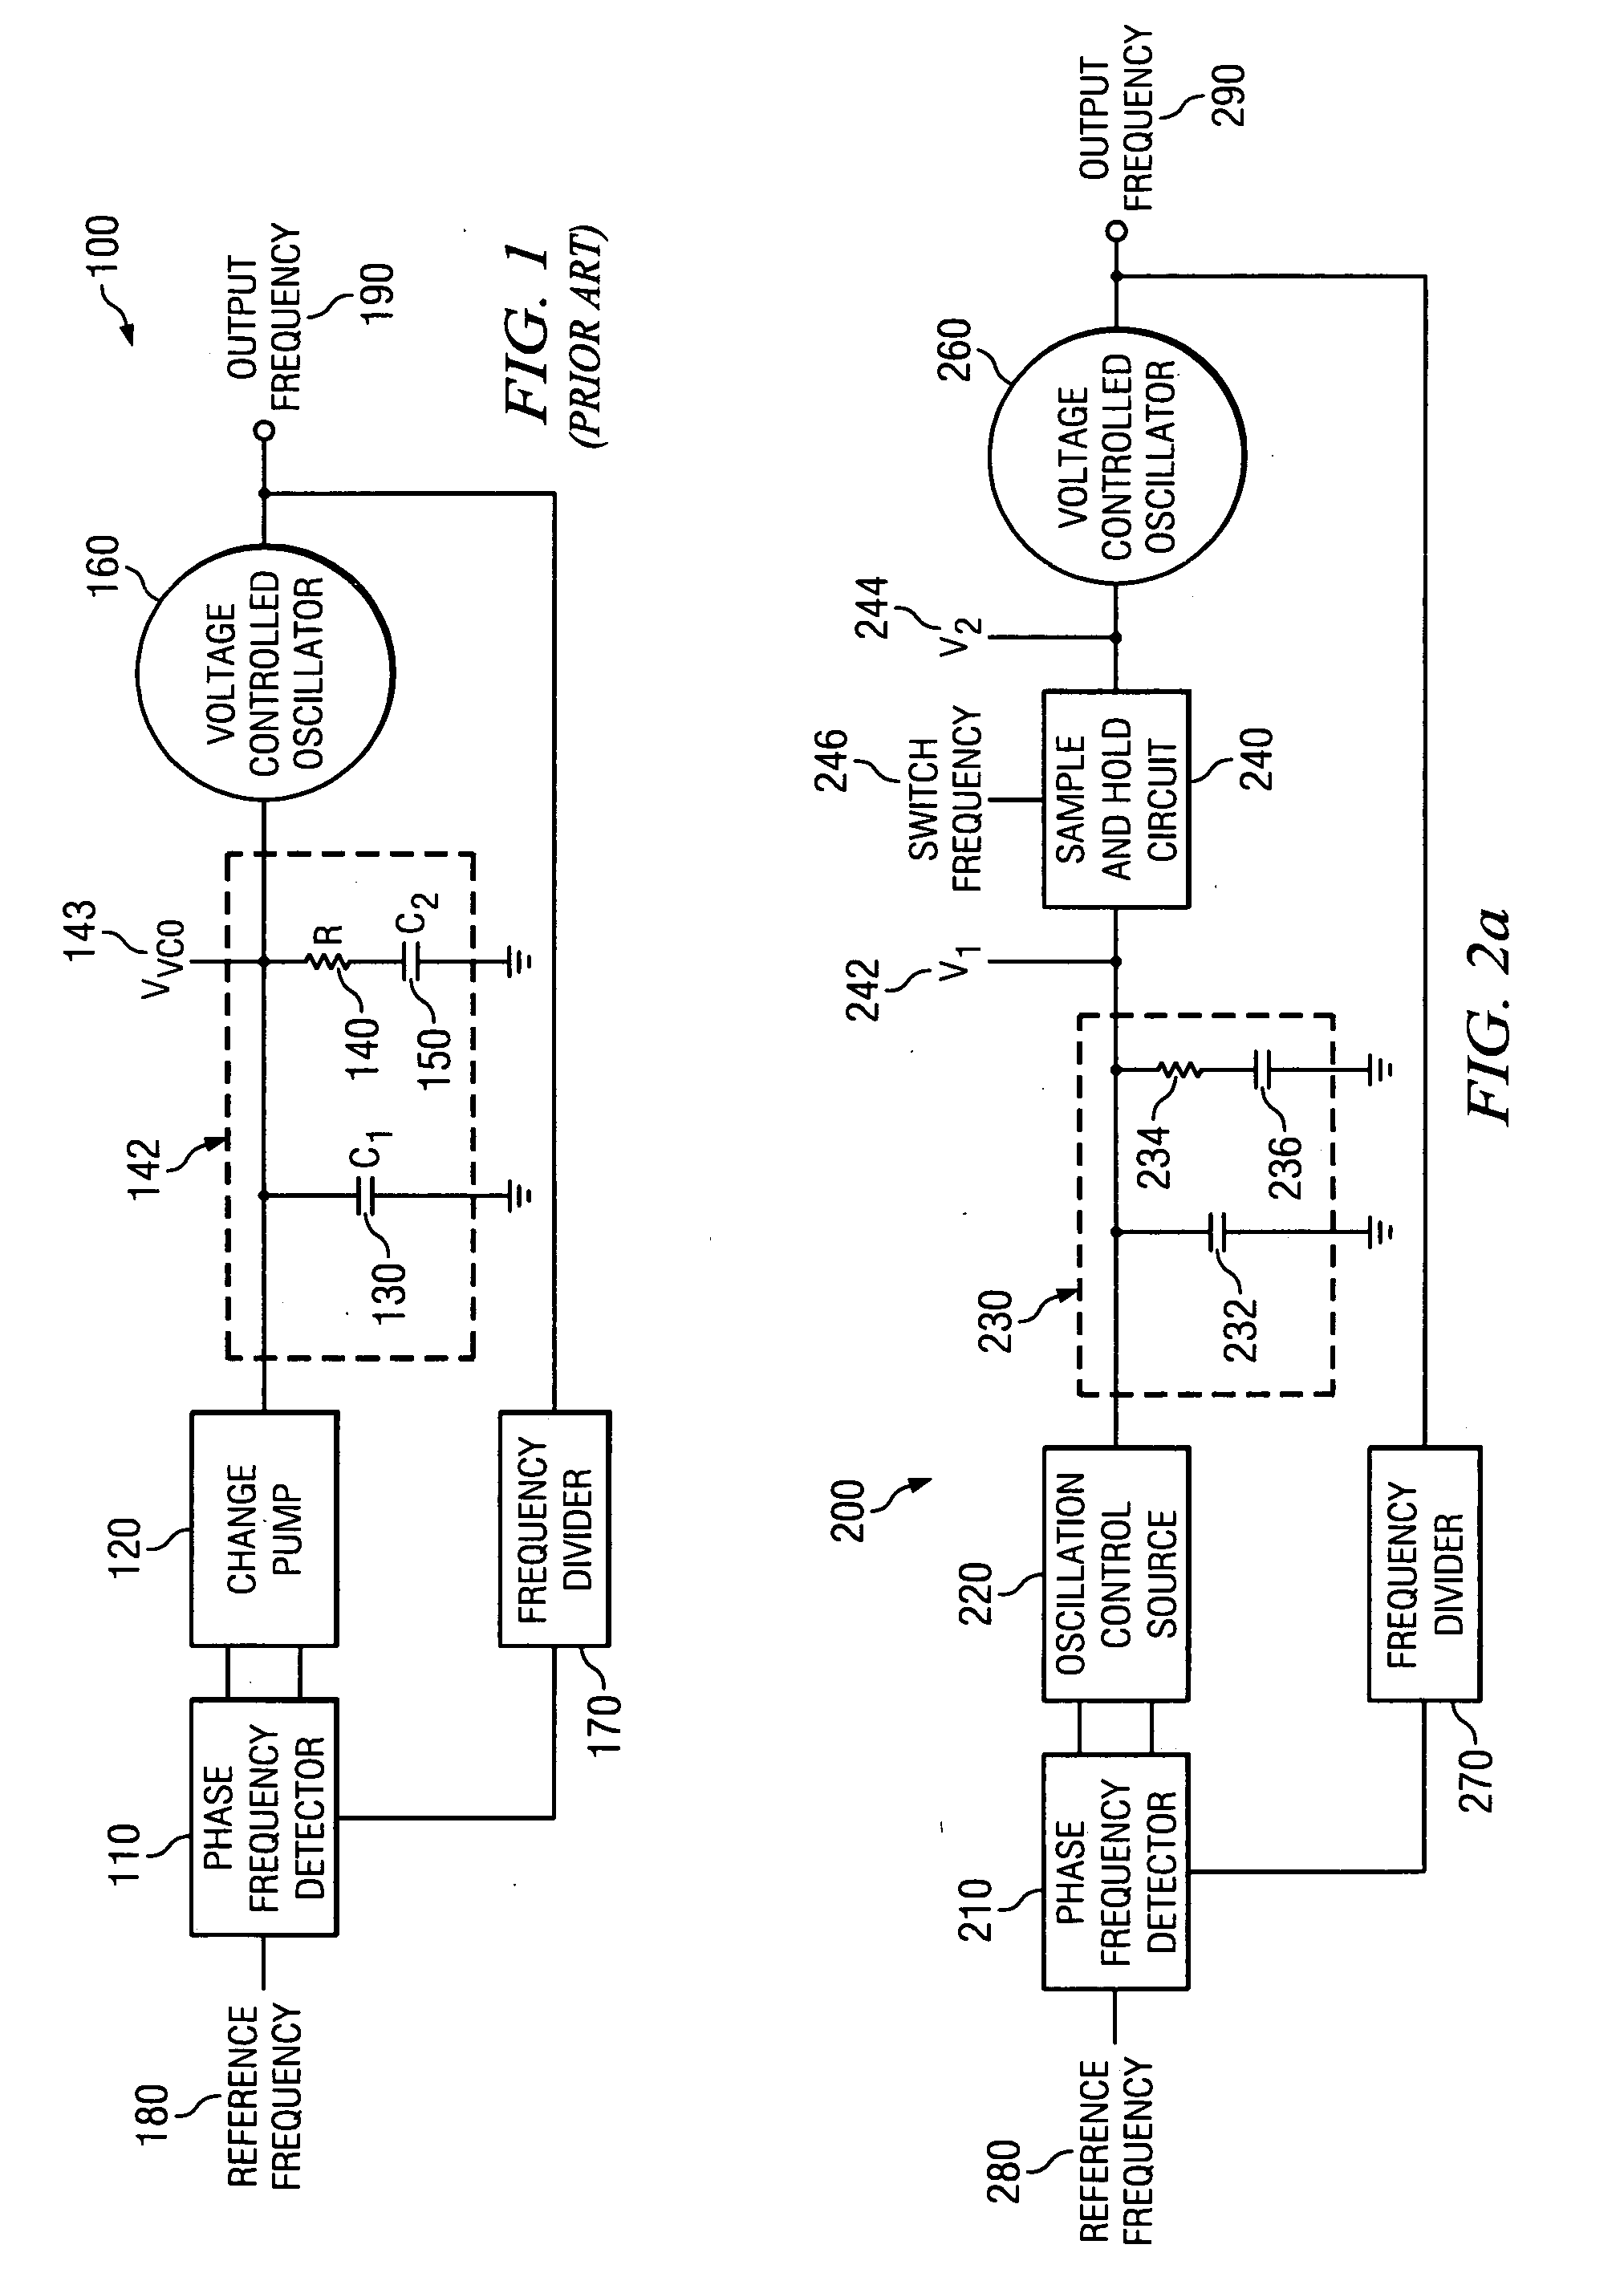 Systems and methods for suppressing feedback and reference noise in a phase lock loop circuit